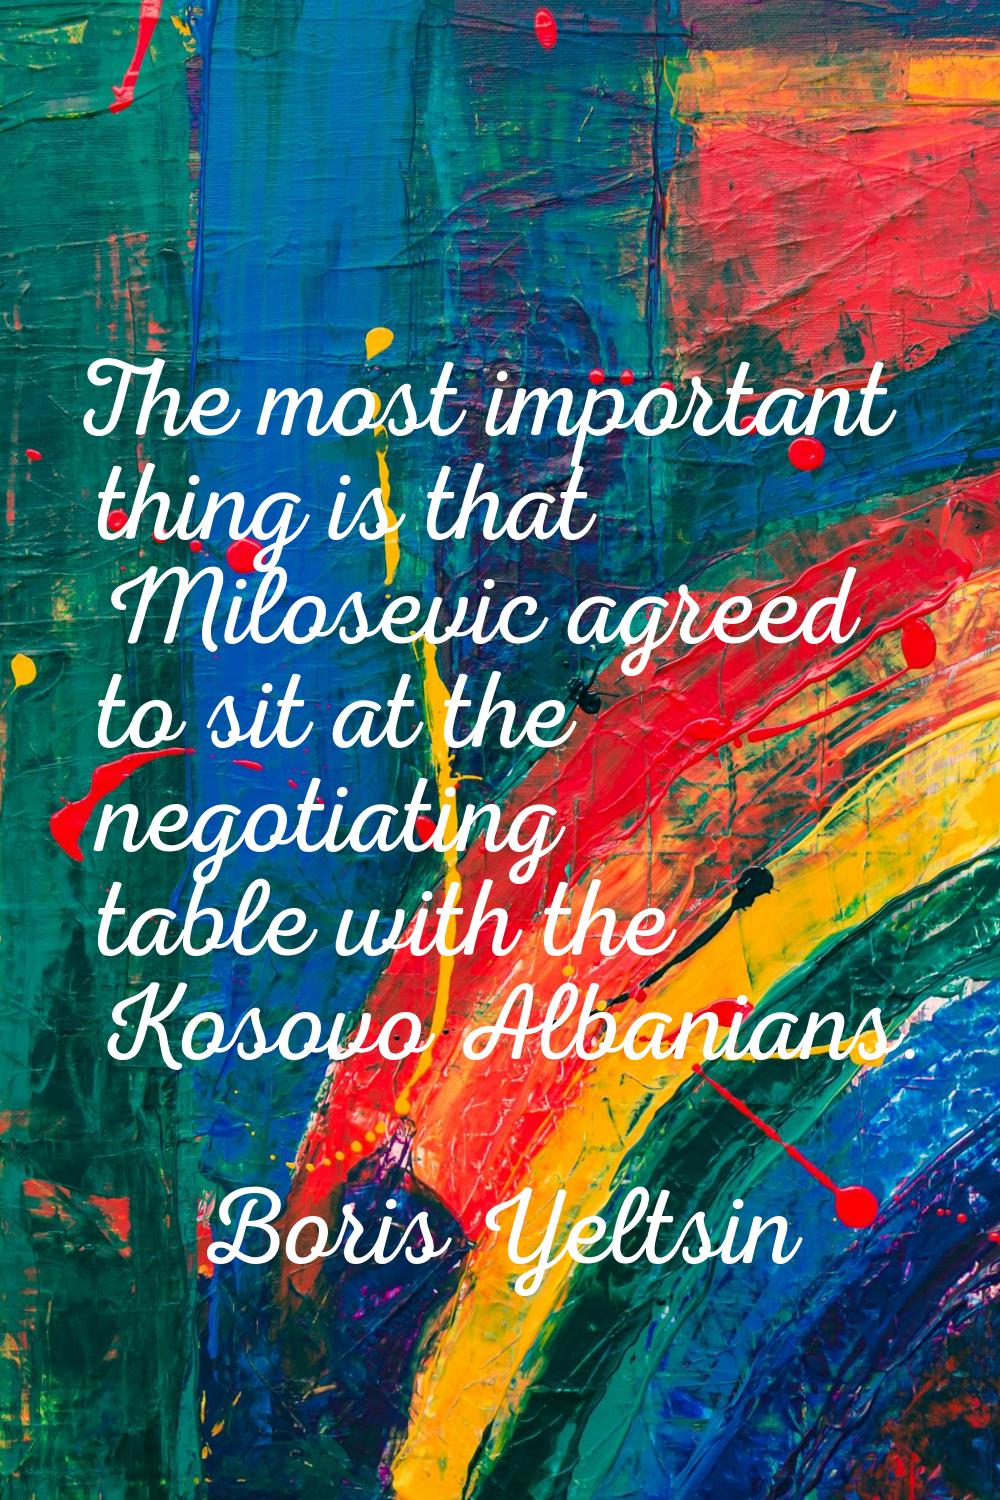 The most important thing is that Milosevic agreed to sit at the negotiating table with the Kosovo A